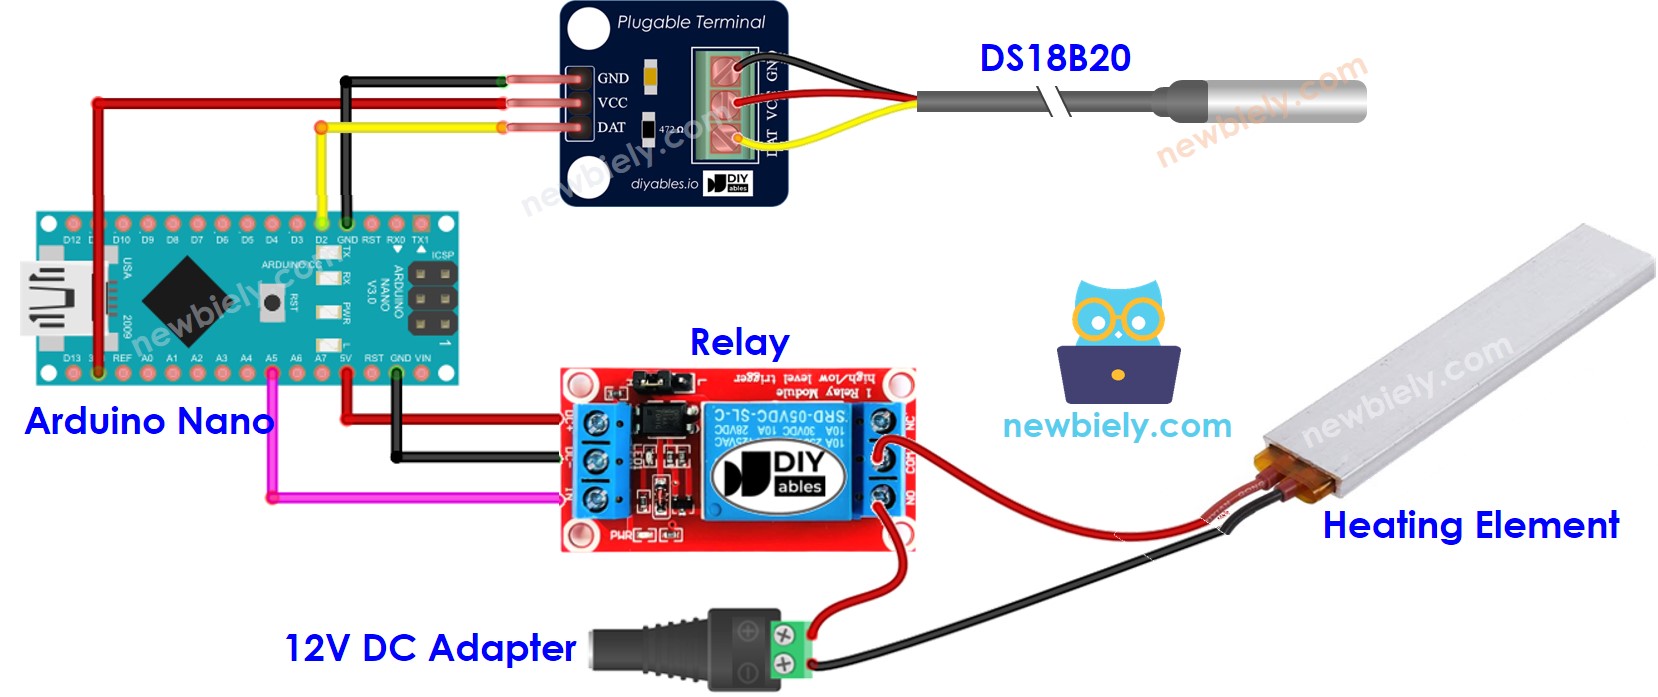 The wiring diagram between Arduino Nano and control heating element